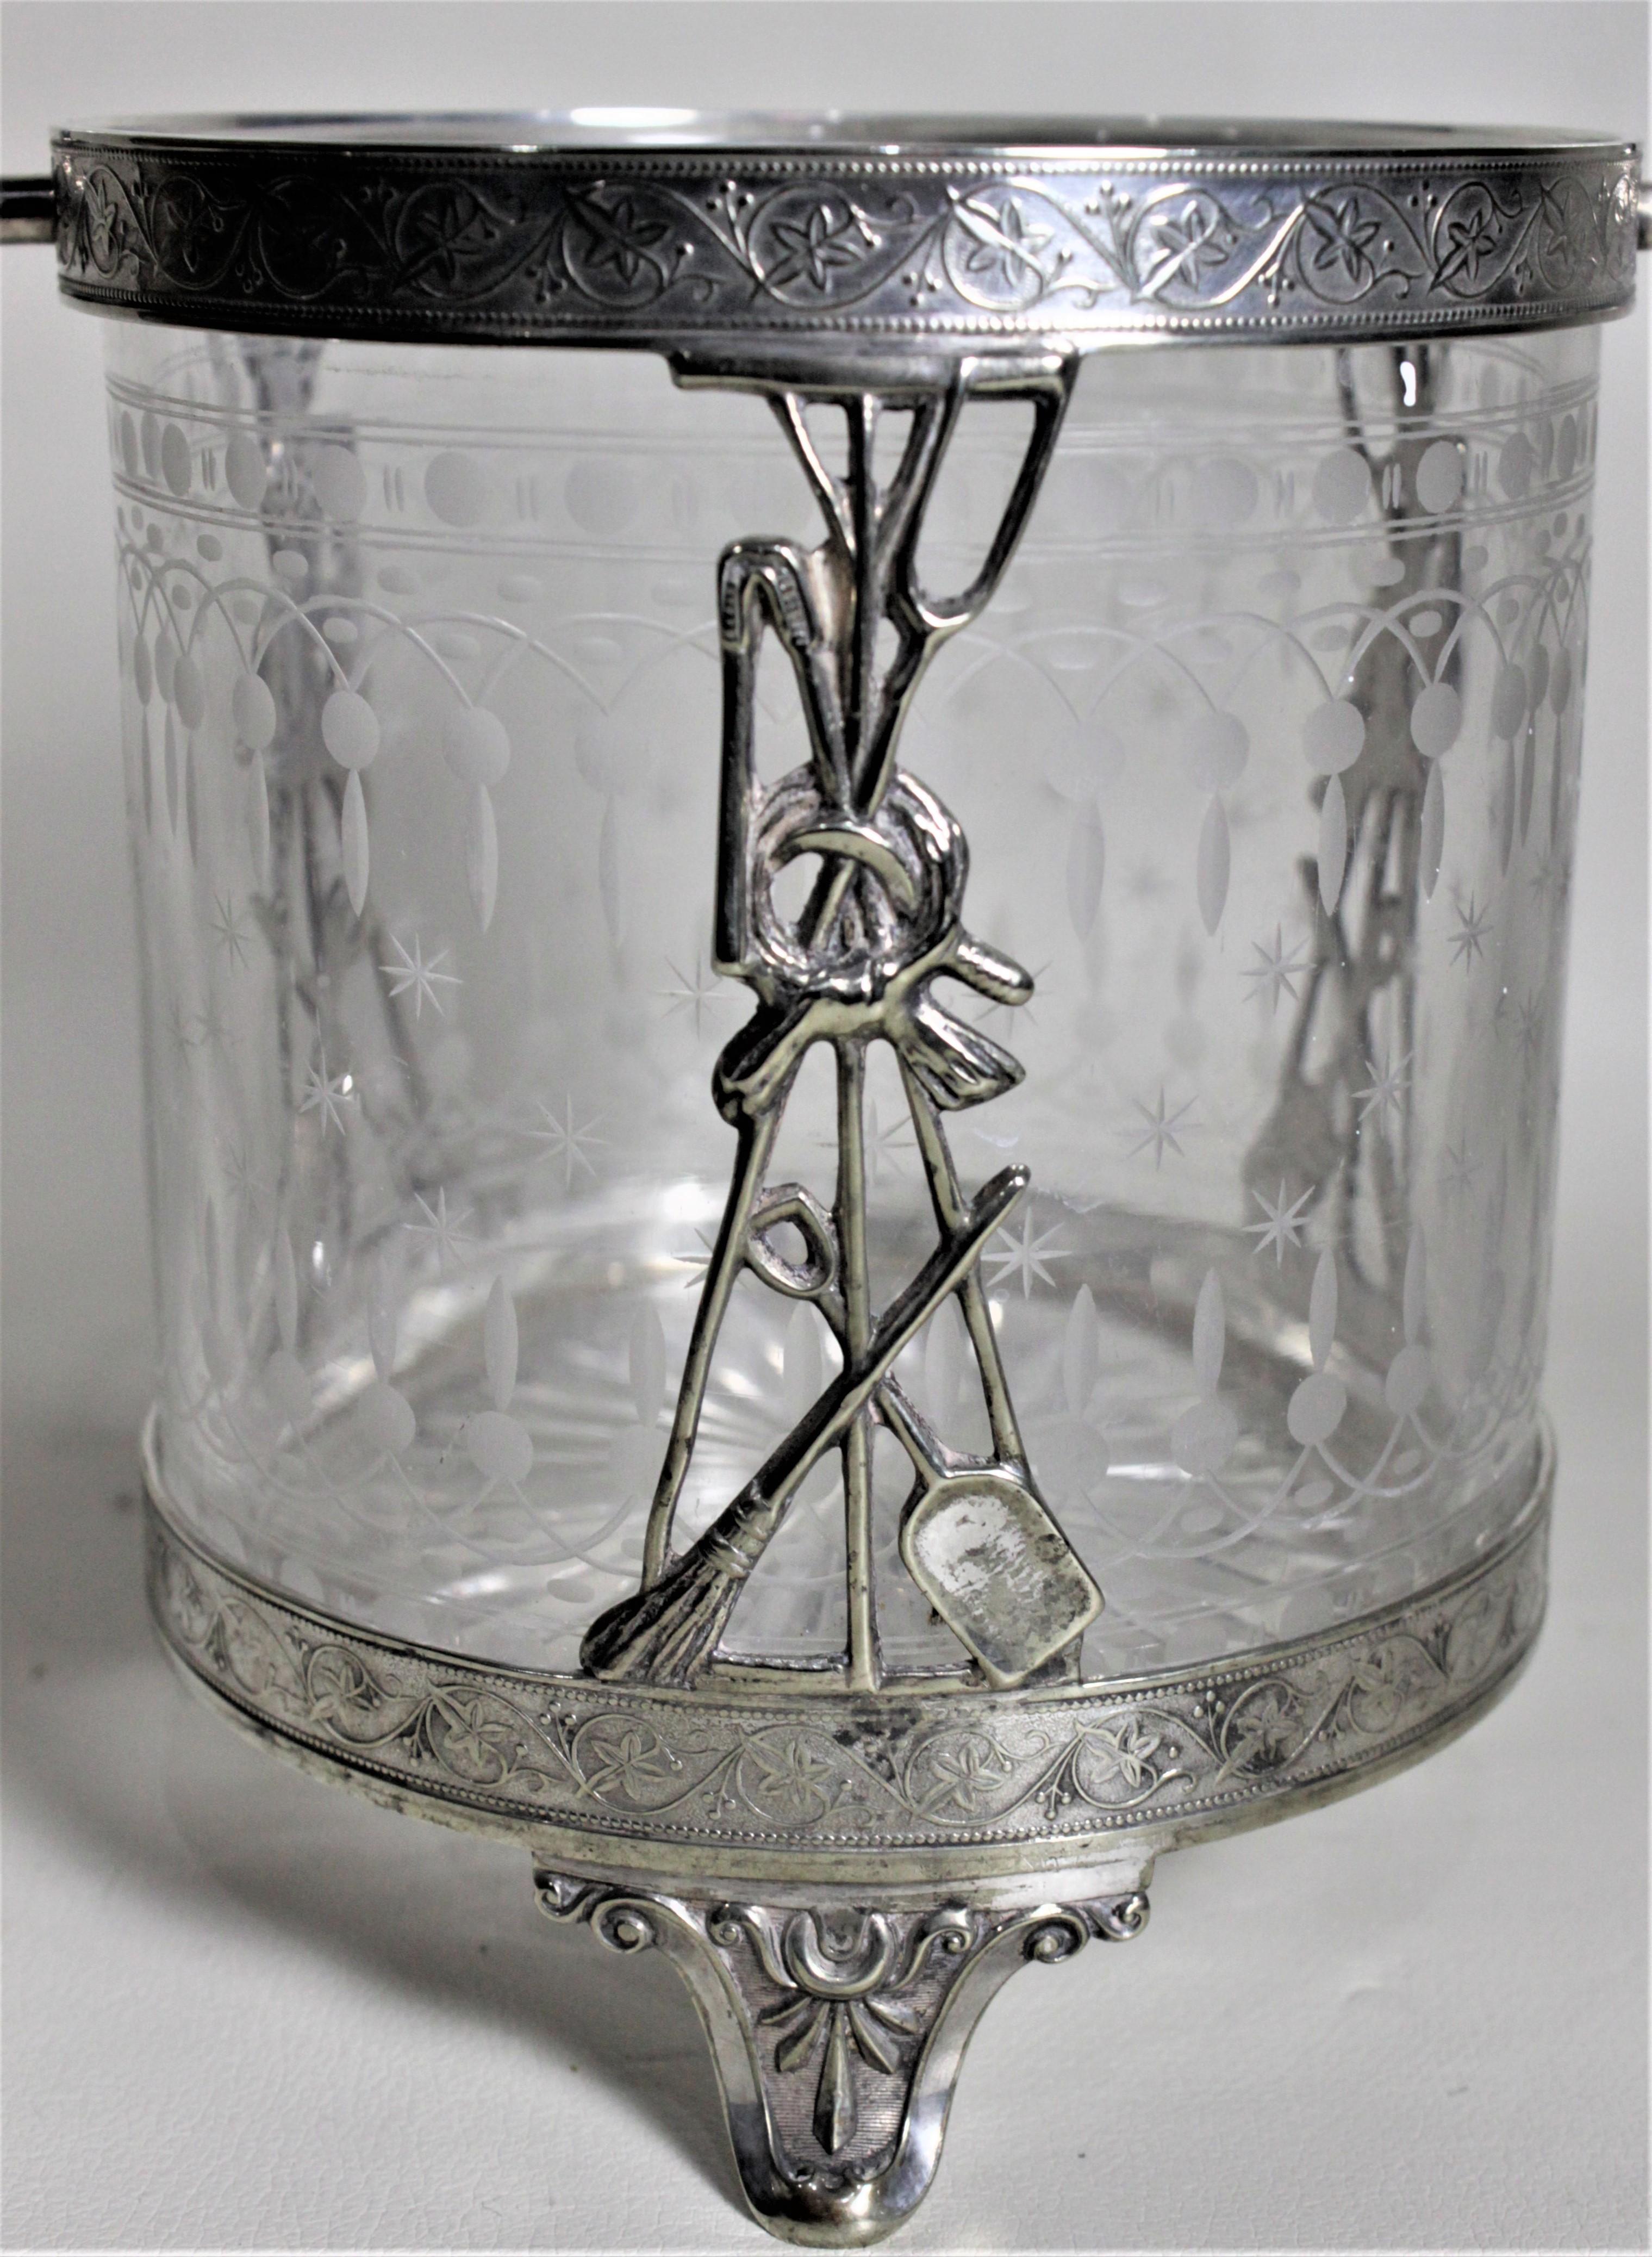 Antique Silver Plated Biscuit Barrel with Figural Decor & Etched Glass Insert 6